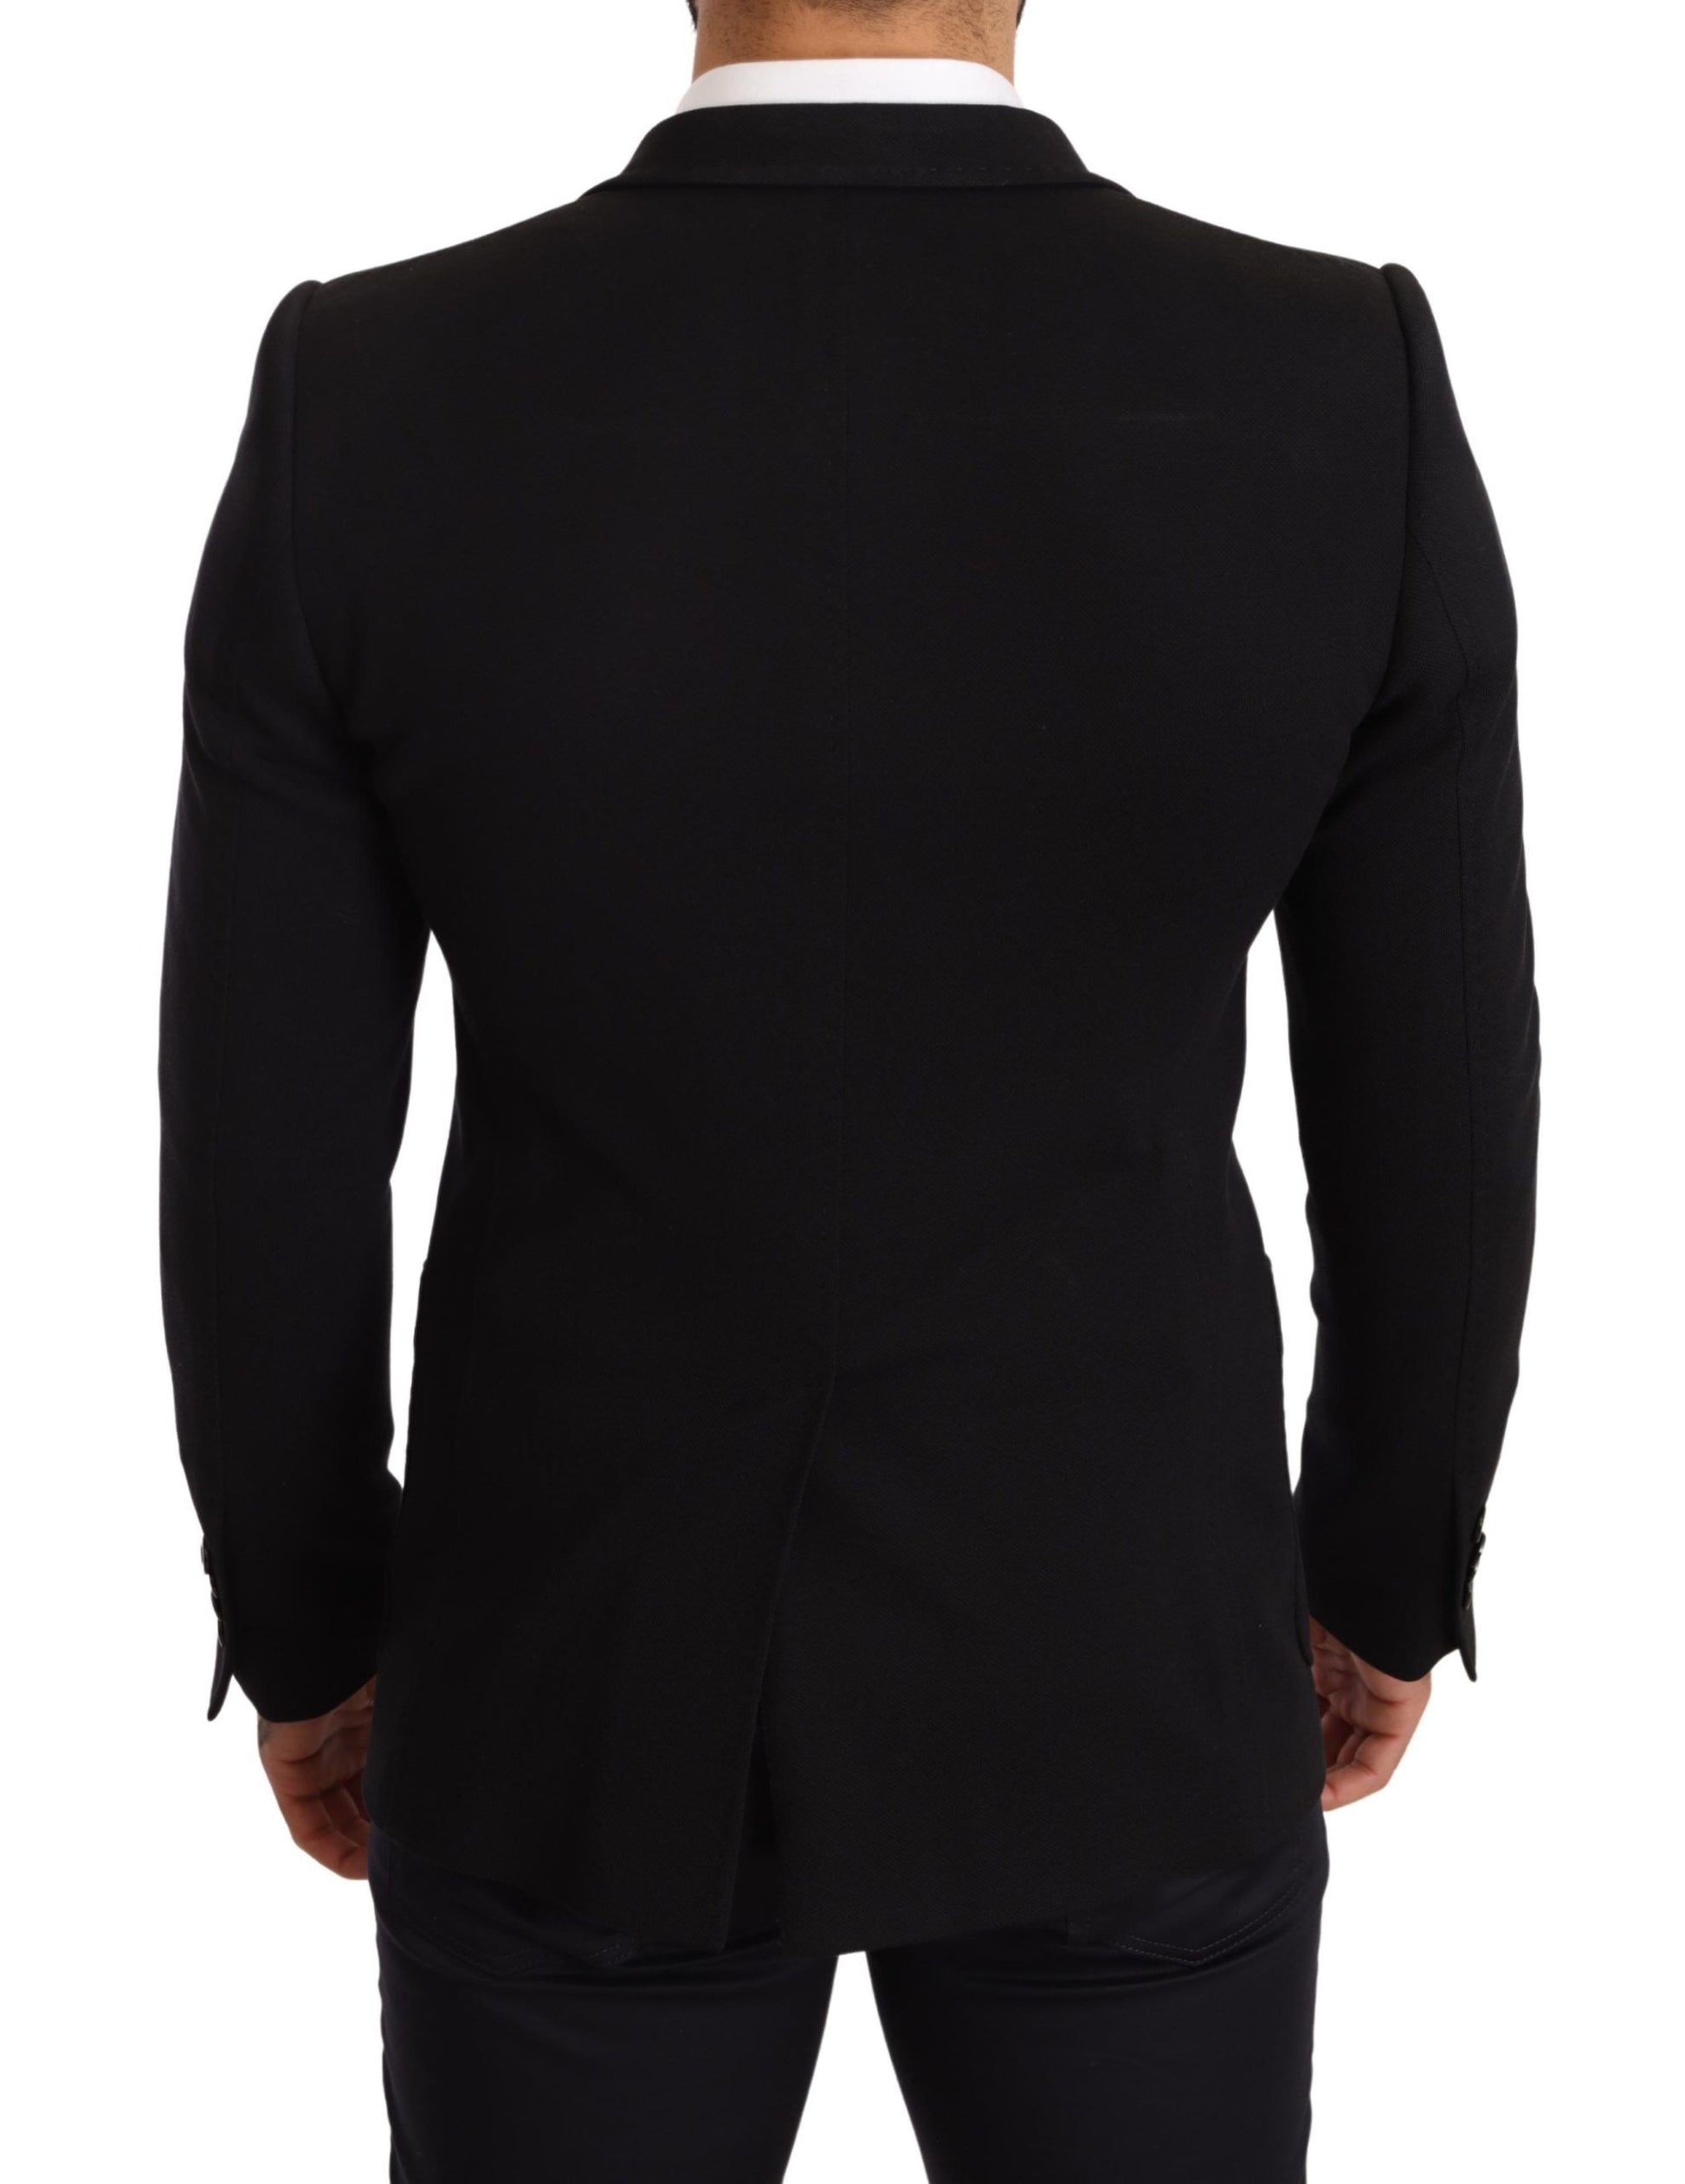 Black Cotton Slim Fit Coat Jacket  Blazer - Designed by Dolce & Gabbana Available to Buy at a Discounted Price on Moon Behind The Hill Online Designer Discount Store